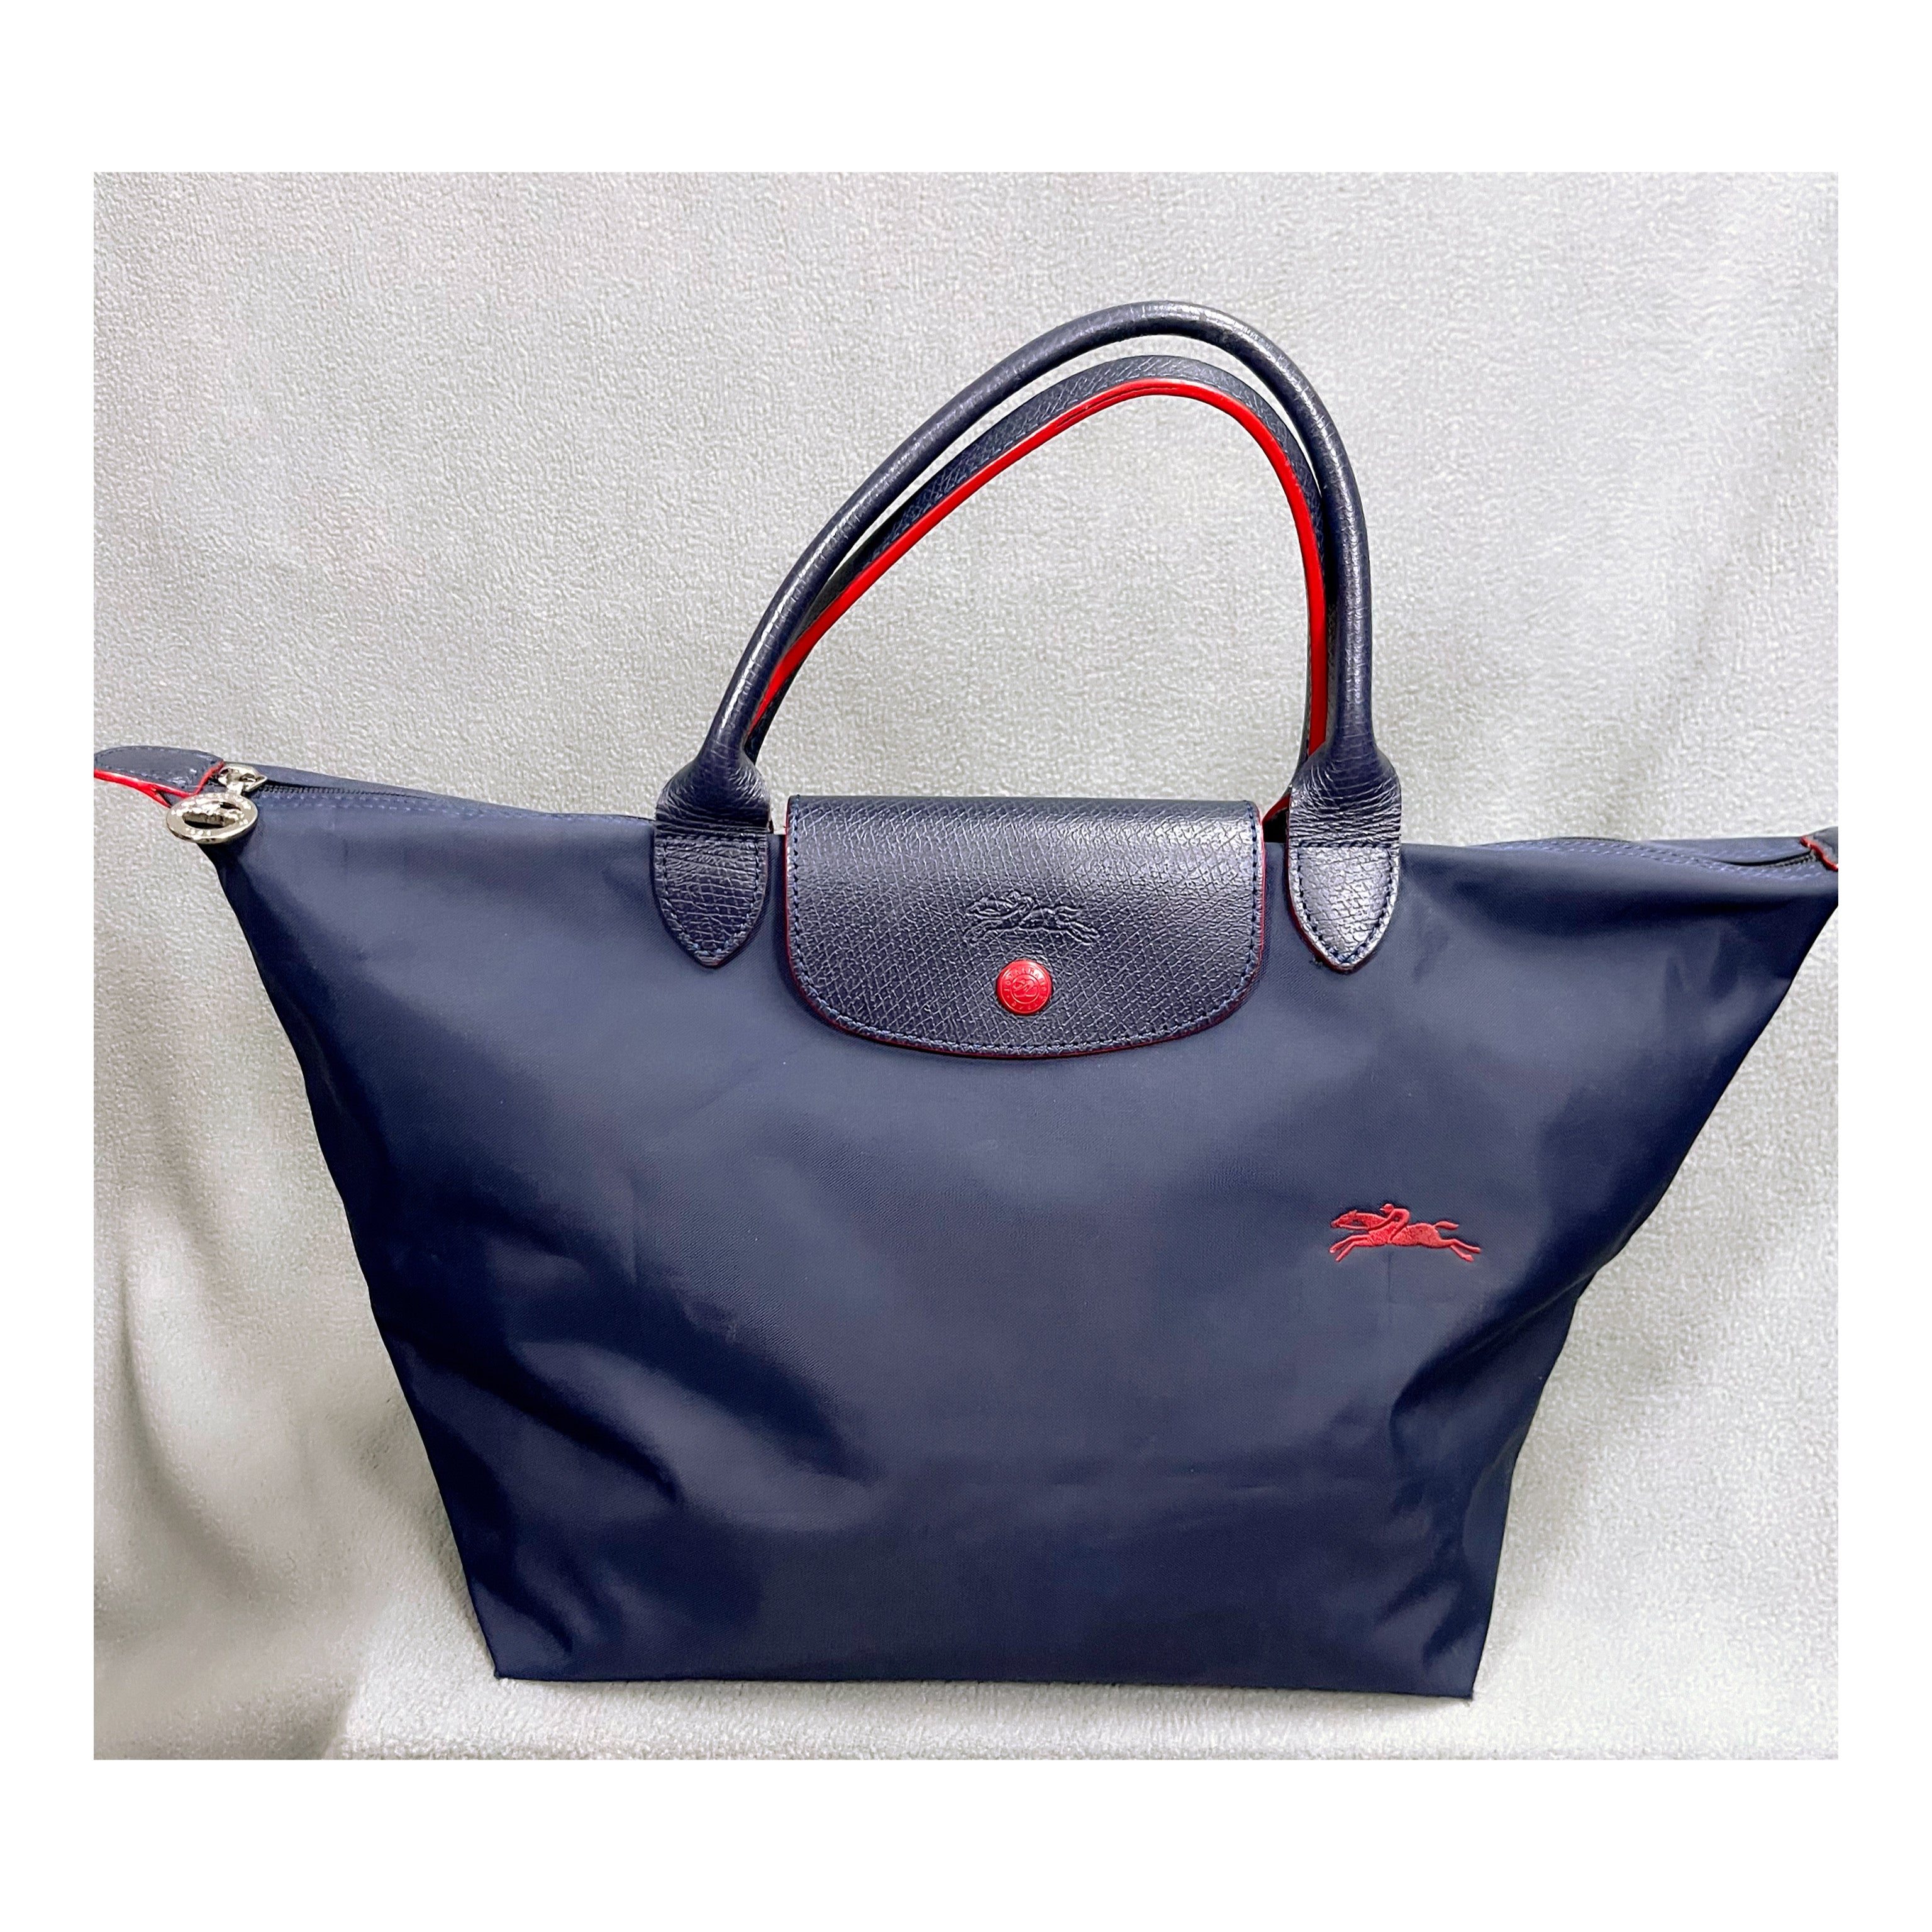 Longchamp Le Pliage navy and red tote